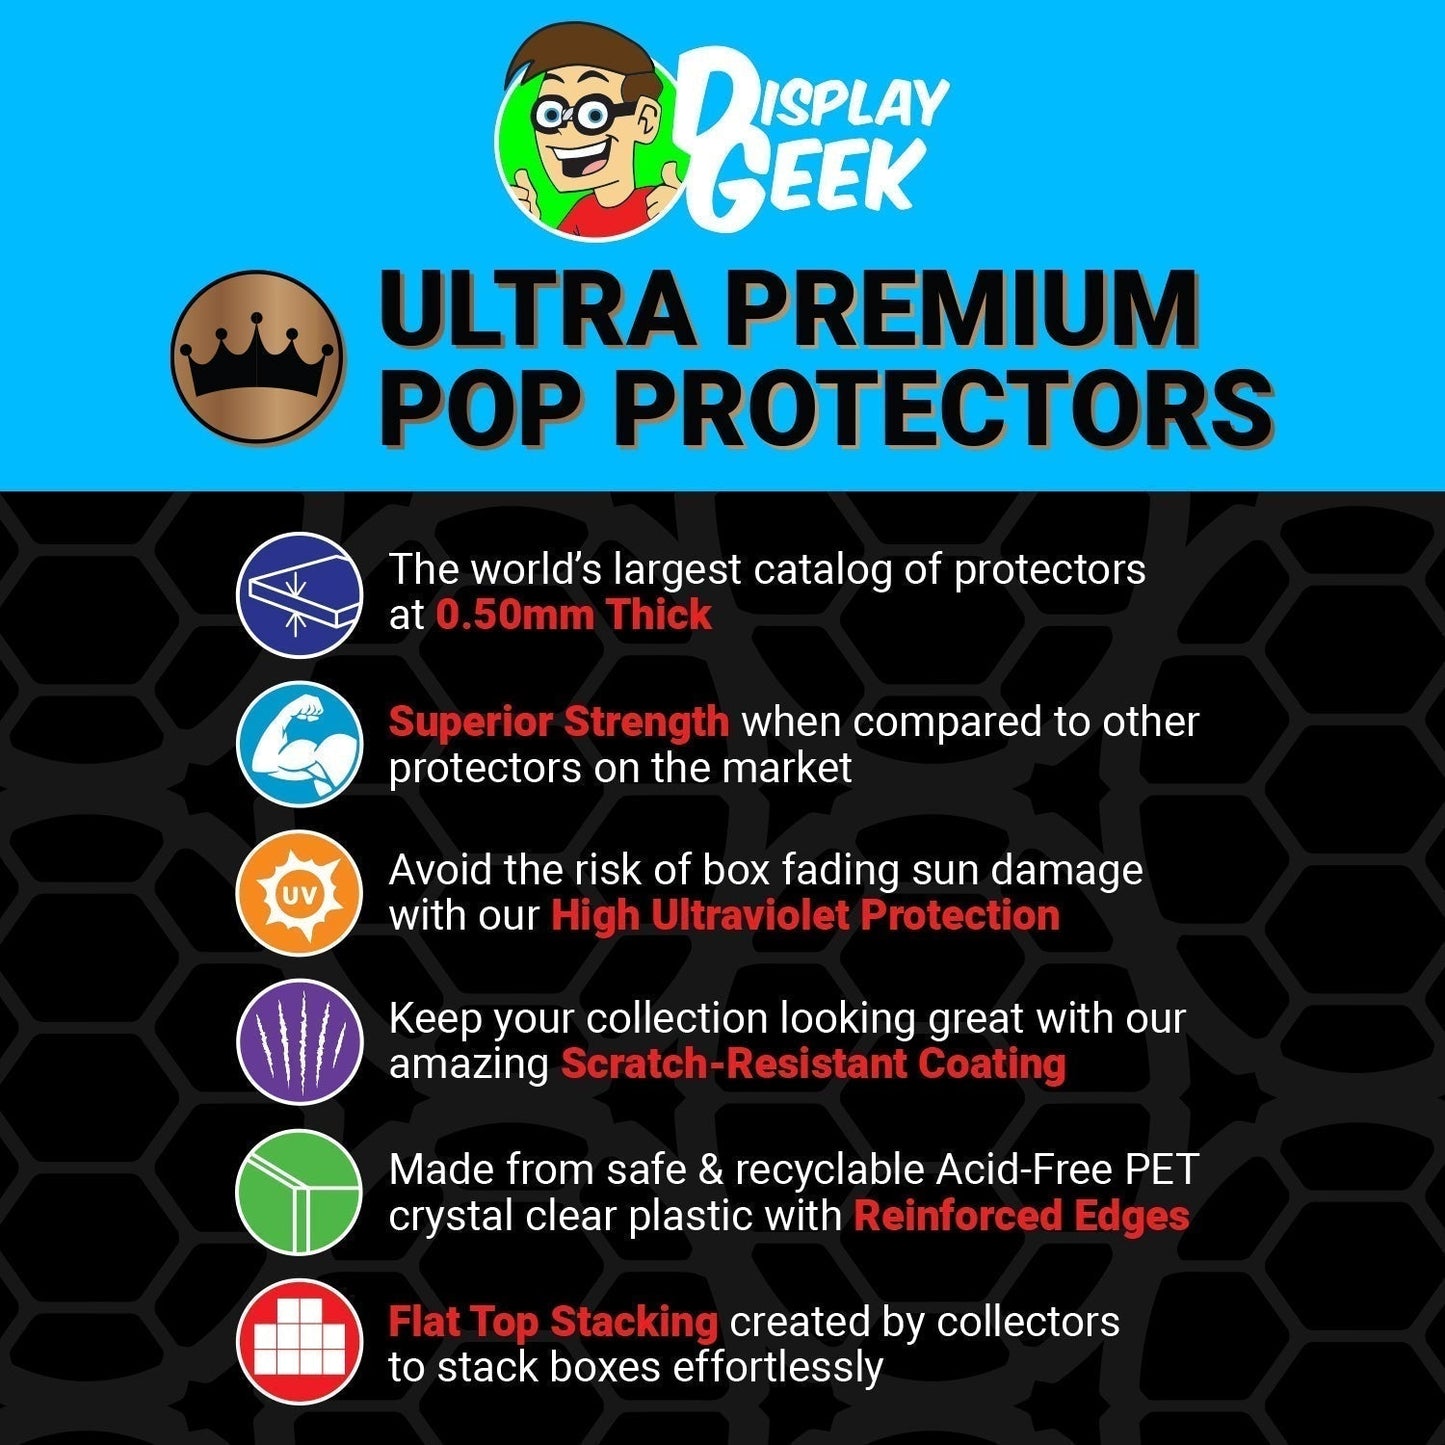 Pop Protector for Pop & Tee Captain Marvel Diamond #427 Funko Box - PPG Pop Protector Guide Search Created by Display Geek